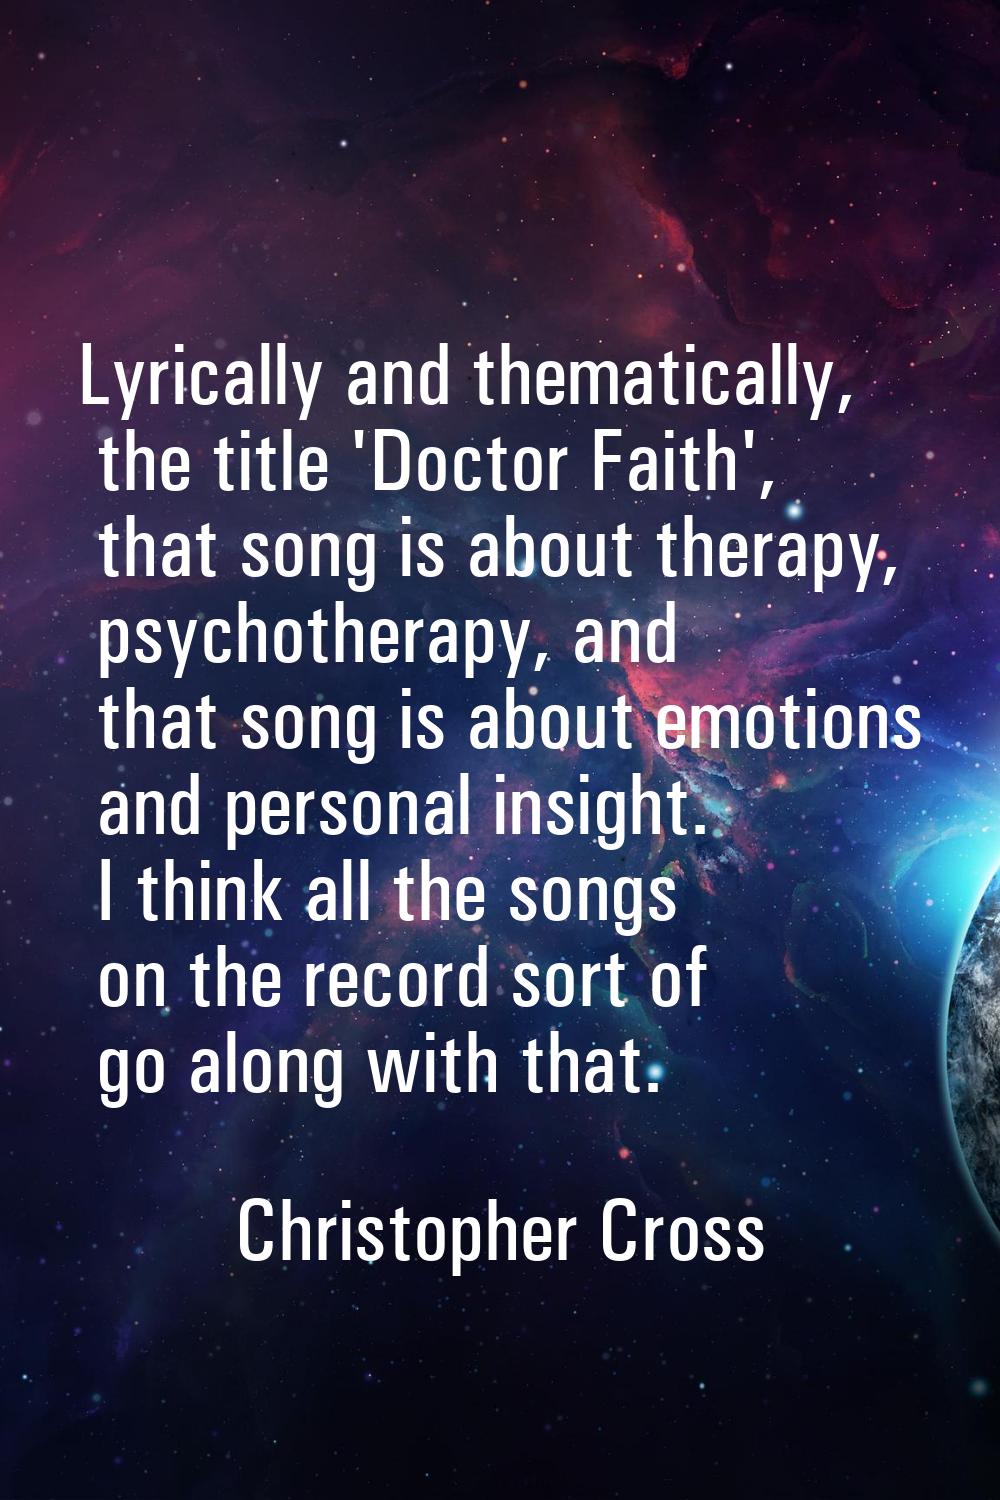 Lyrically and thematically, the title 'Doctor Faith', that song is about therapy, psychotherapy, an